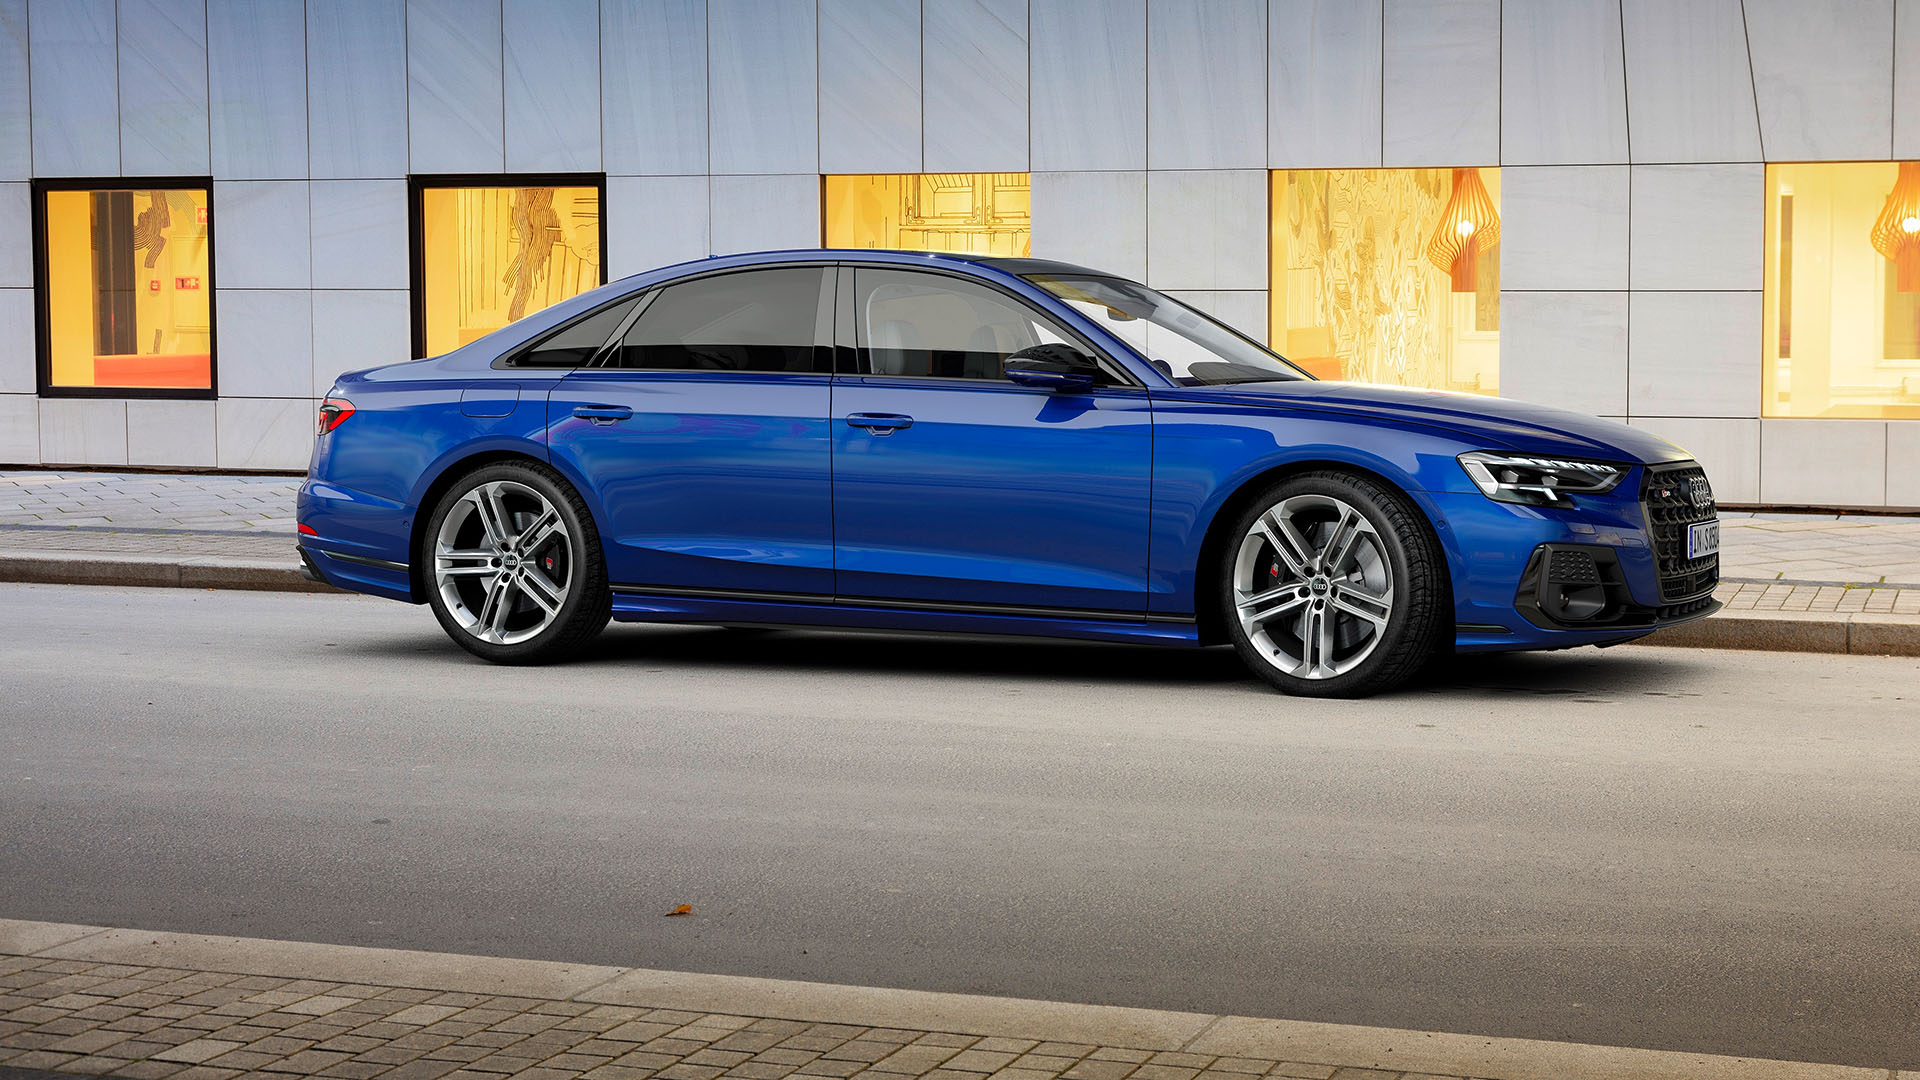 The new Audi S8 for 2022